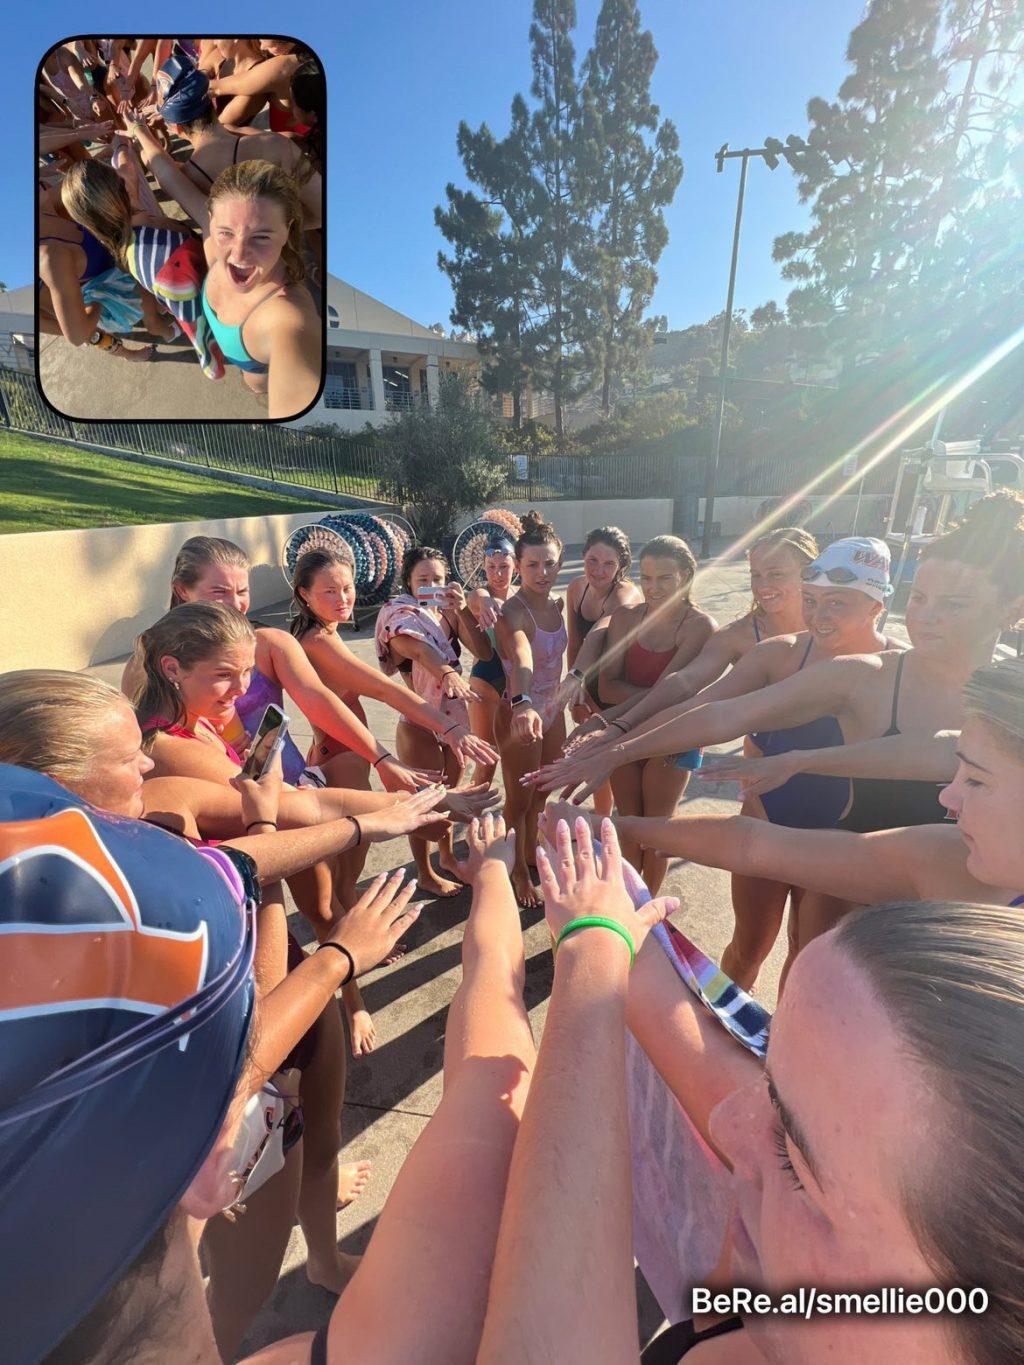 The Swim and Dive team at Pepperdine wins their conference meet. Jenna Sanchez captured her BeReal after the win, as all the girls put their hands together in celebration. Photo courtesy of Jenna Sanchez